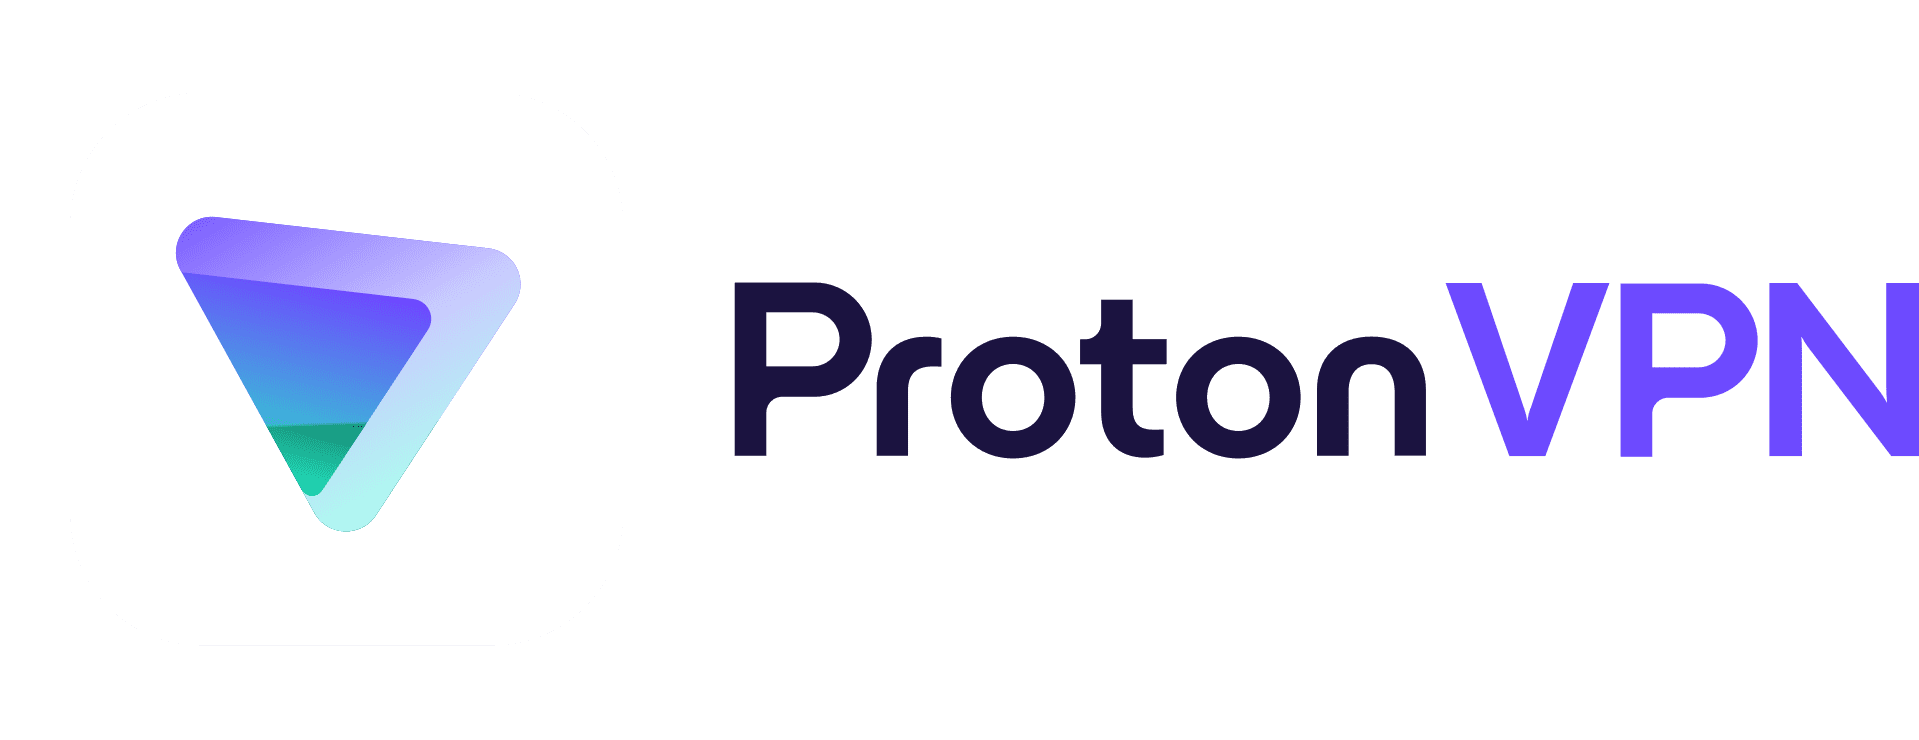 ProtonVPN Black Friday and Cyber Monday Deals - Product Logo